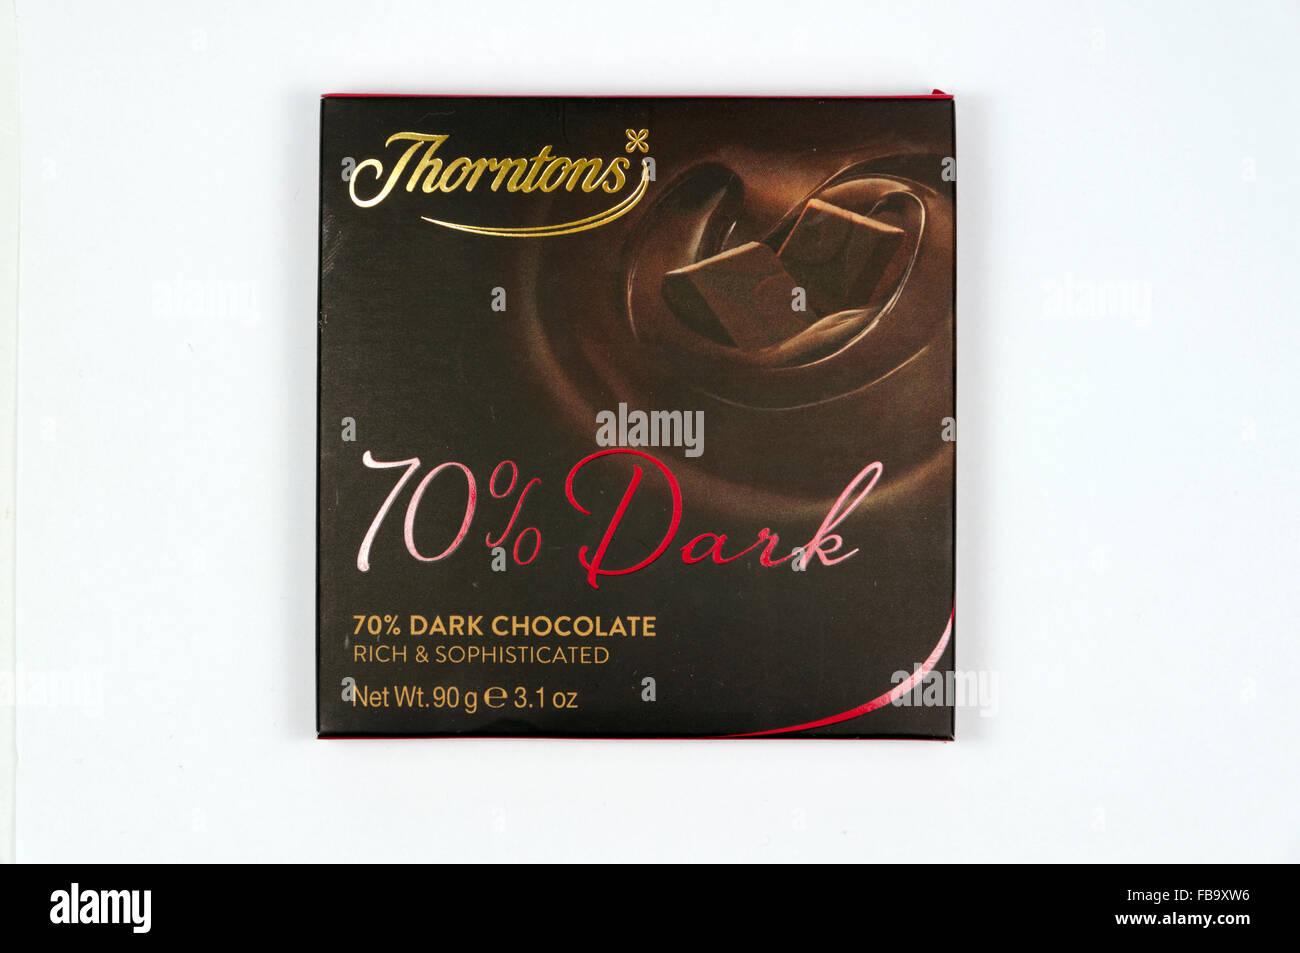 Thorntons 70 % Dark Chocolate Bar. Banque D'Images